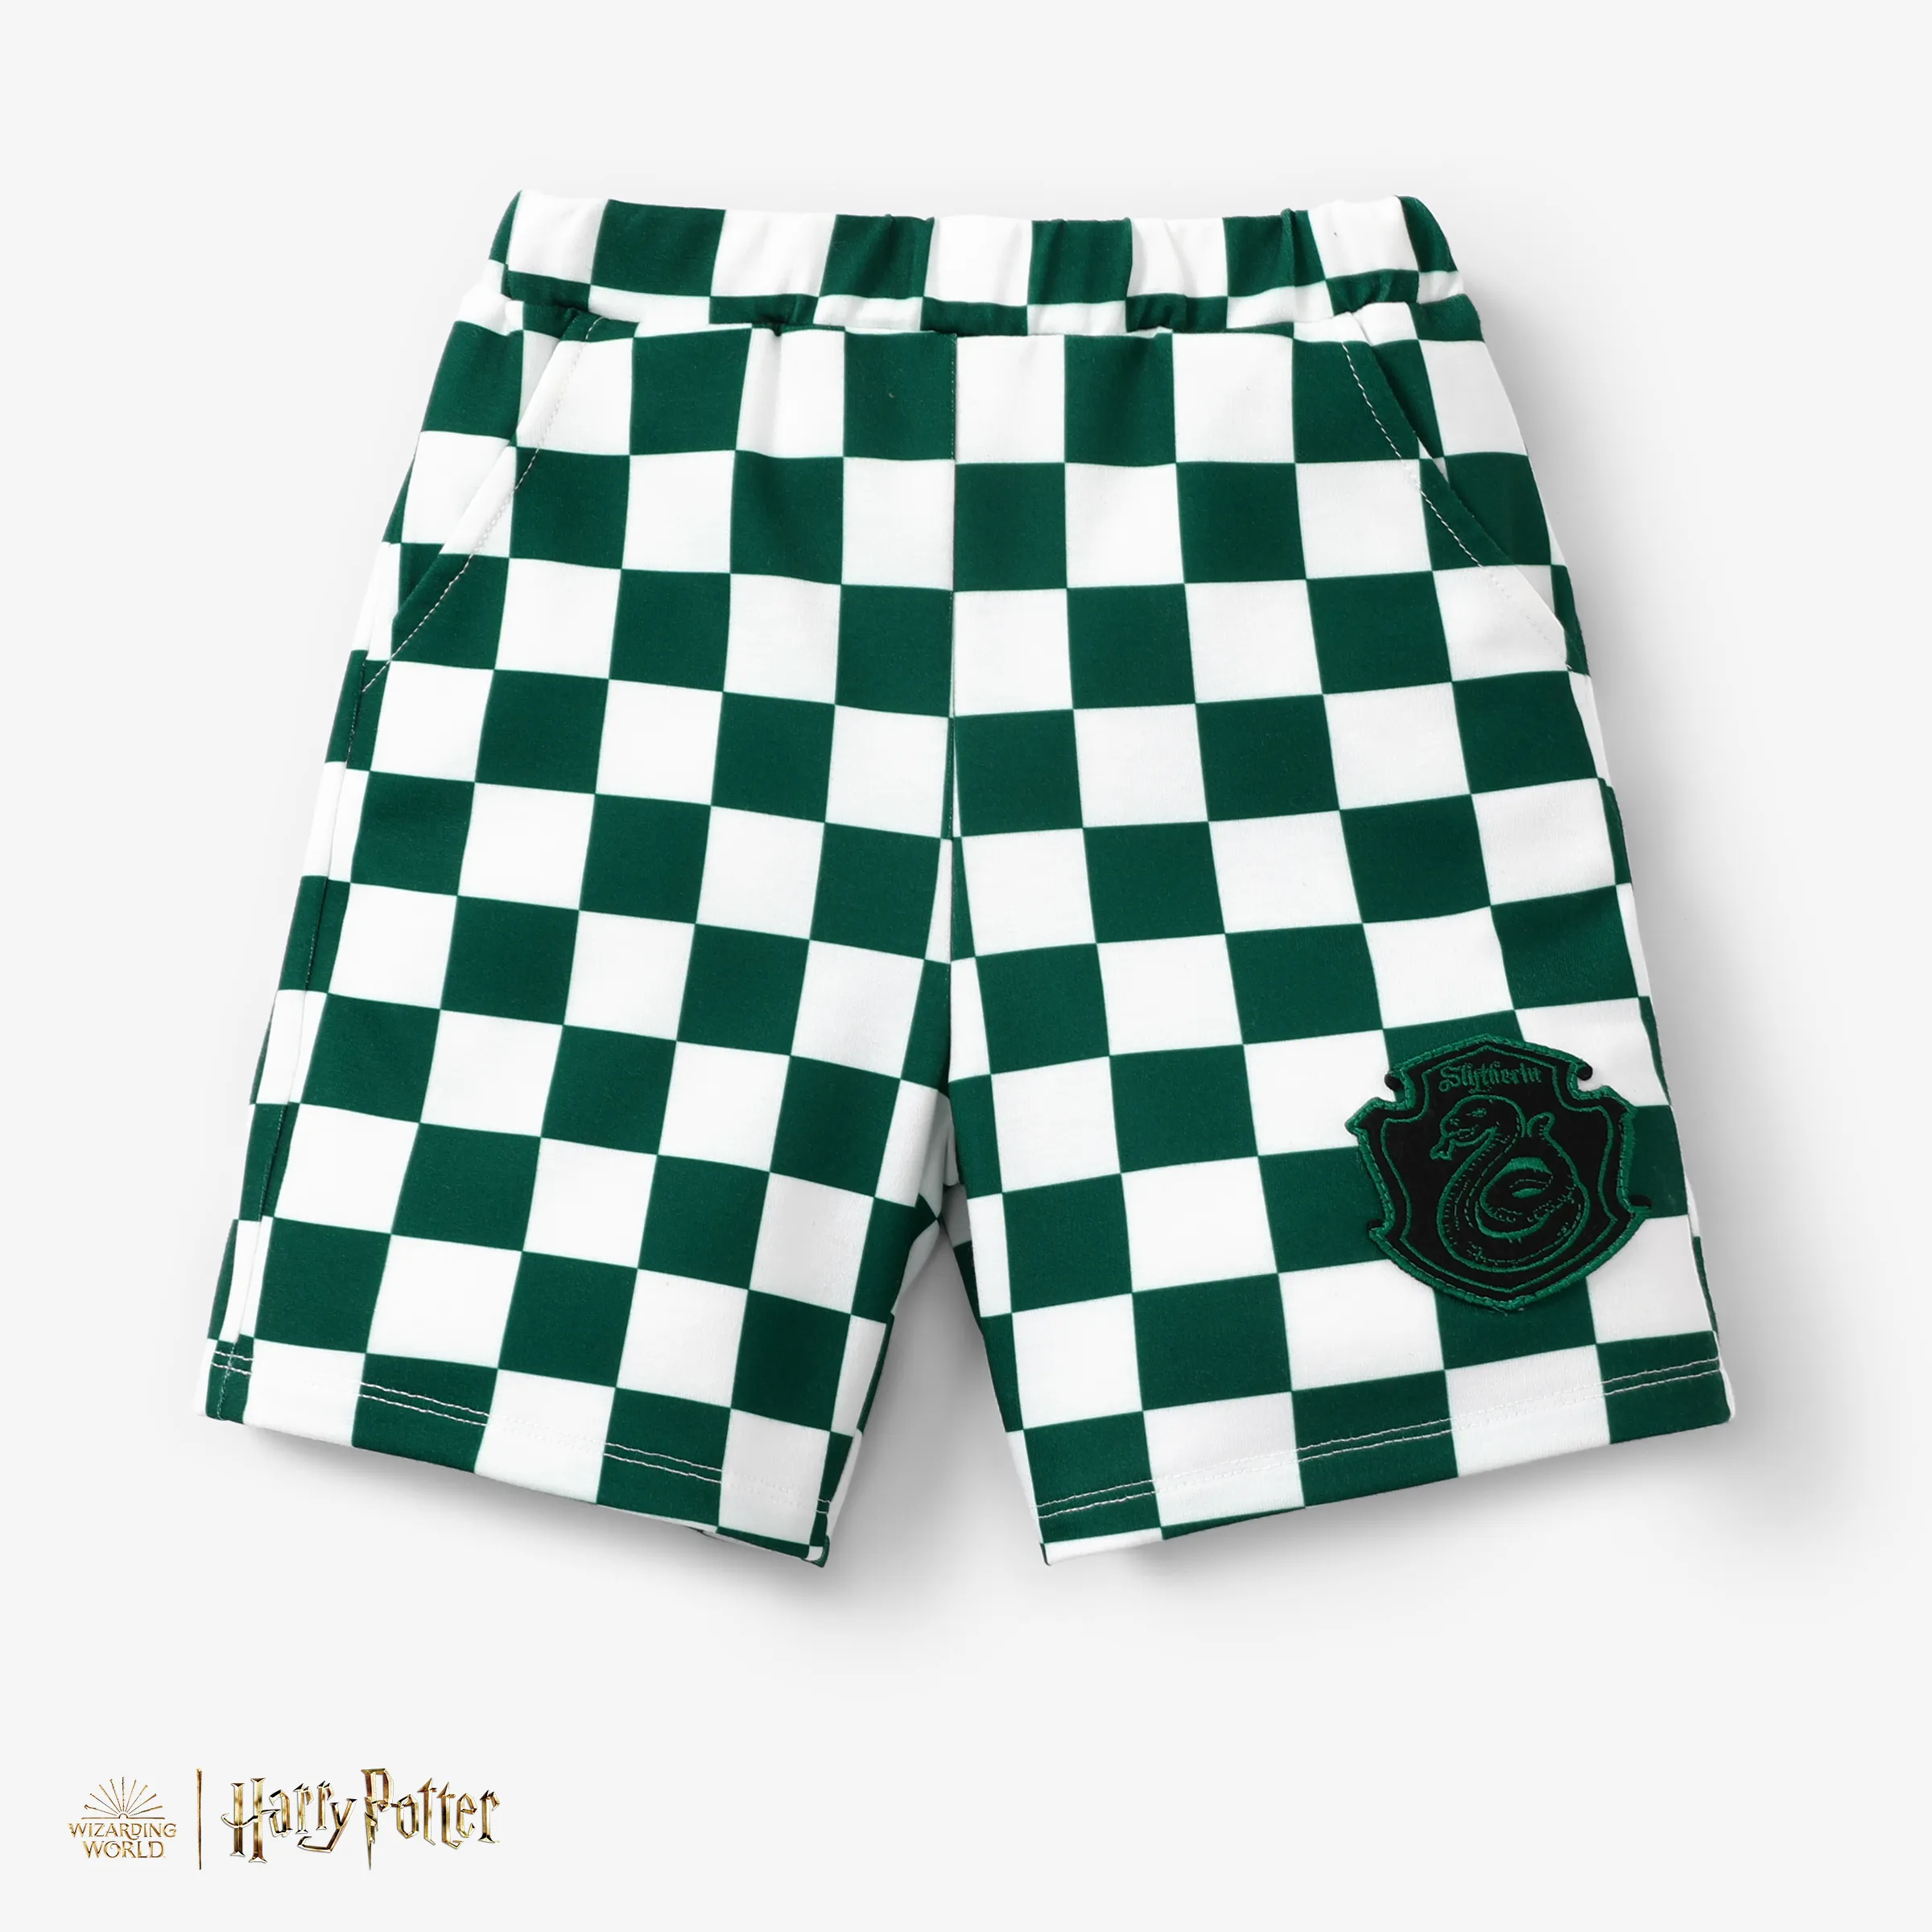 

Harry Potter Toddler/Kid Boy 1pc Chess Grid pattern Preppy style Polo Shirt or Shorts